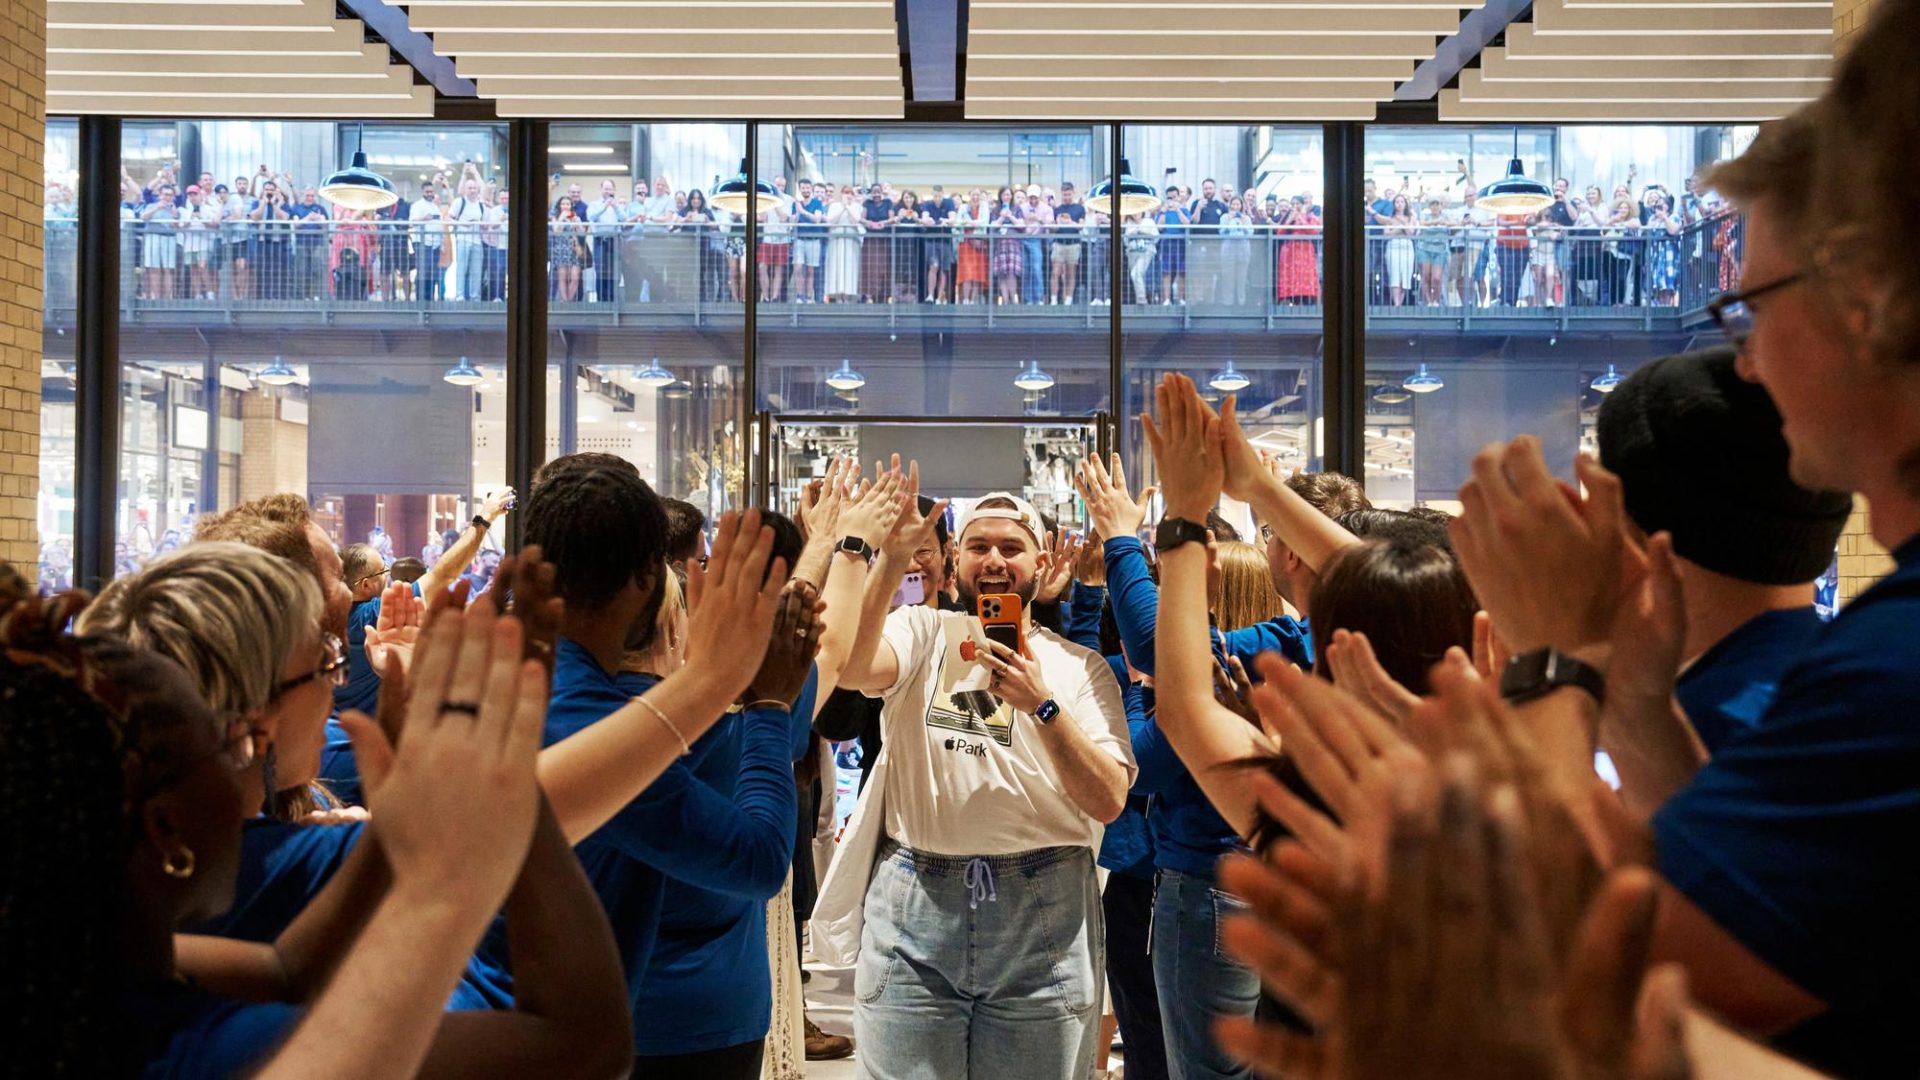 Apple Battersea, Apple’s newest store in London, welcomes customers at the historic Battersea Power Station.